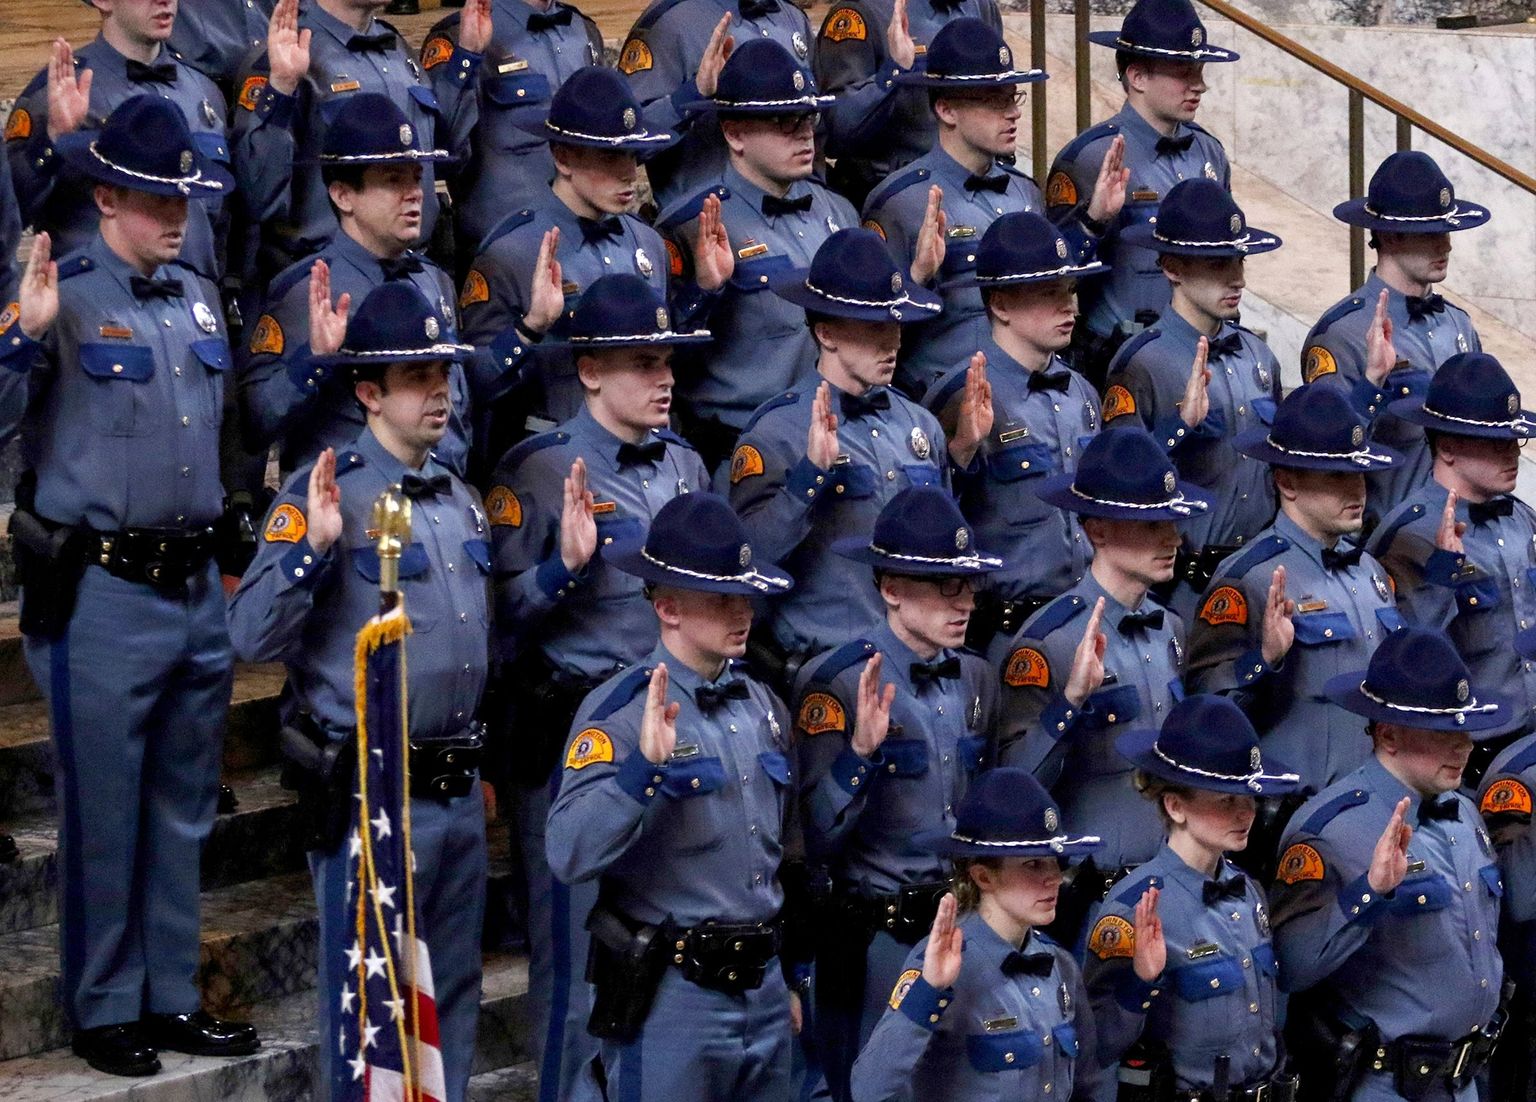 Thirty-one new Washington state troopers are sworn in.